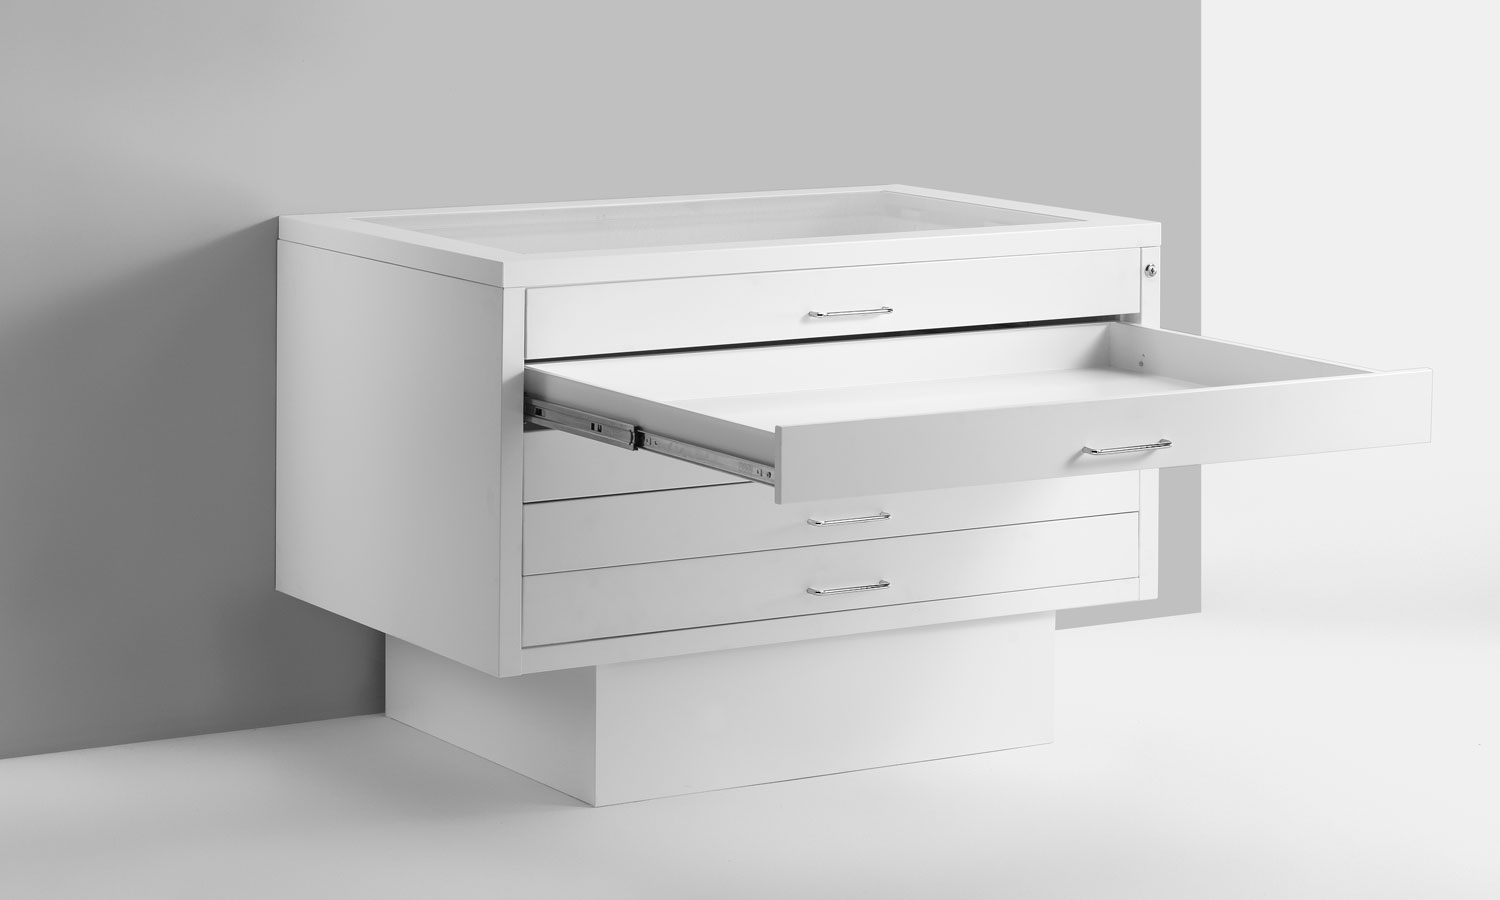 Archival flat drawer cabinets - Filing cabinets - Emme Italia